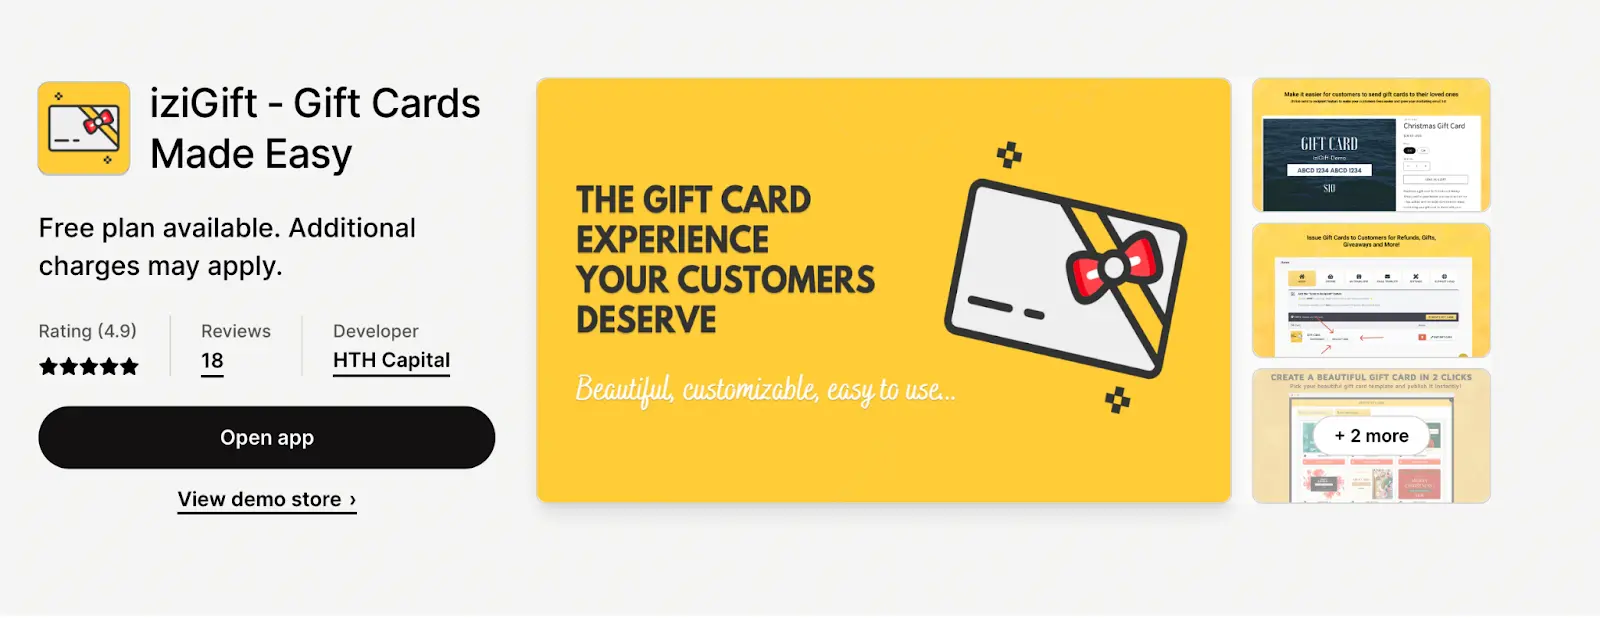 shopify-gift-card-apps-2